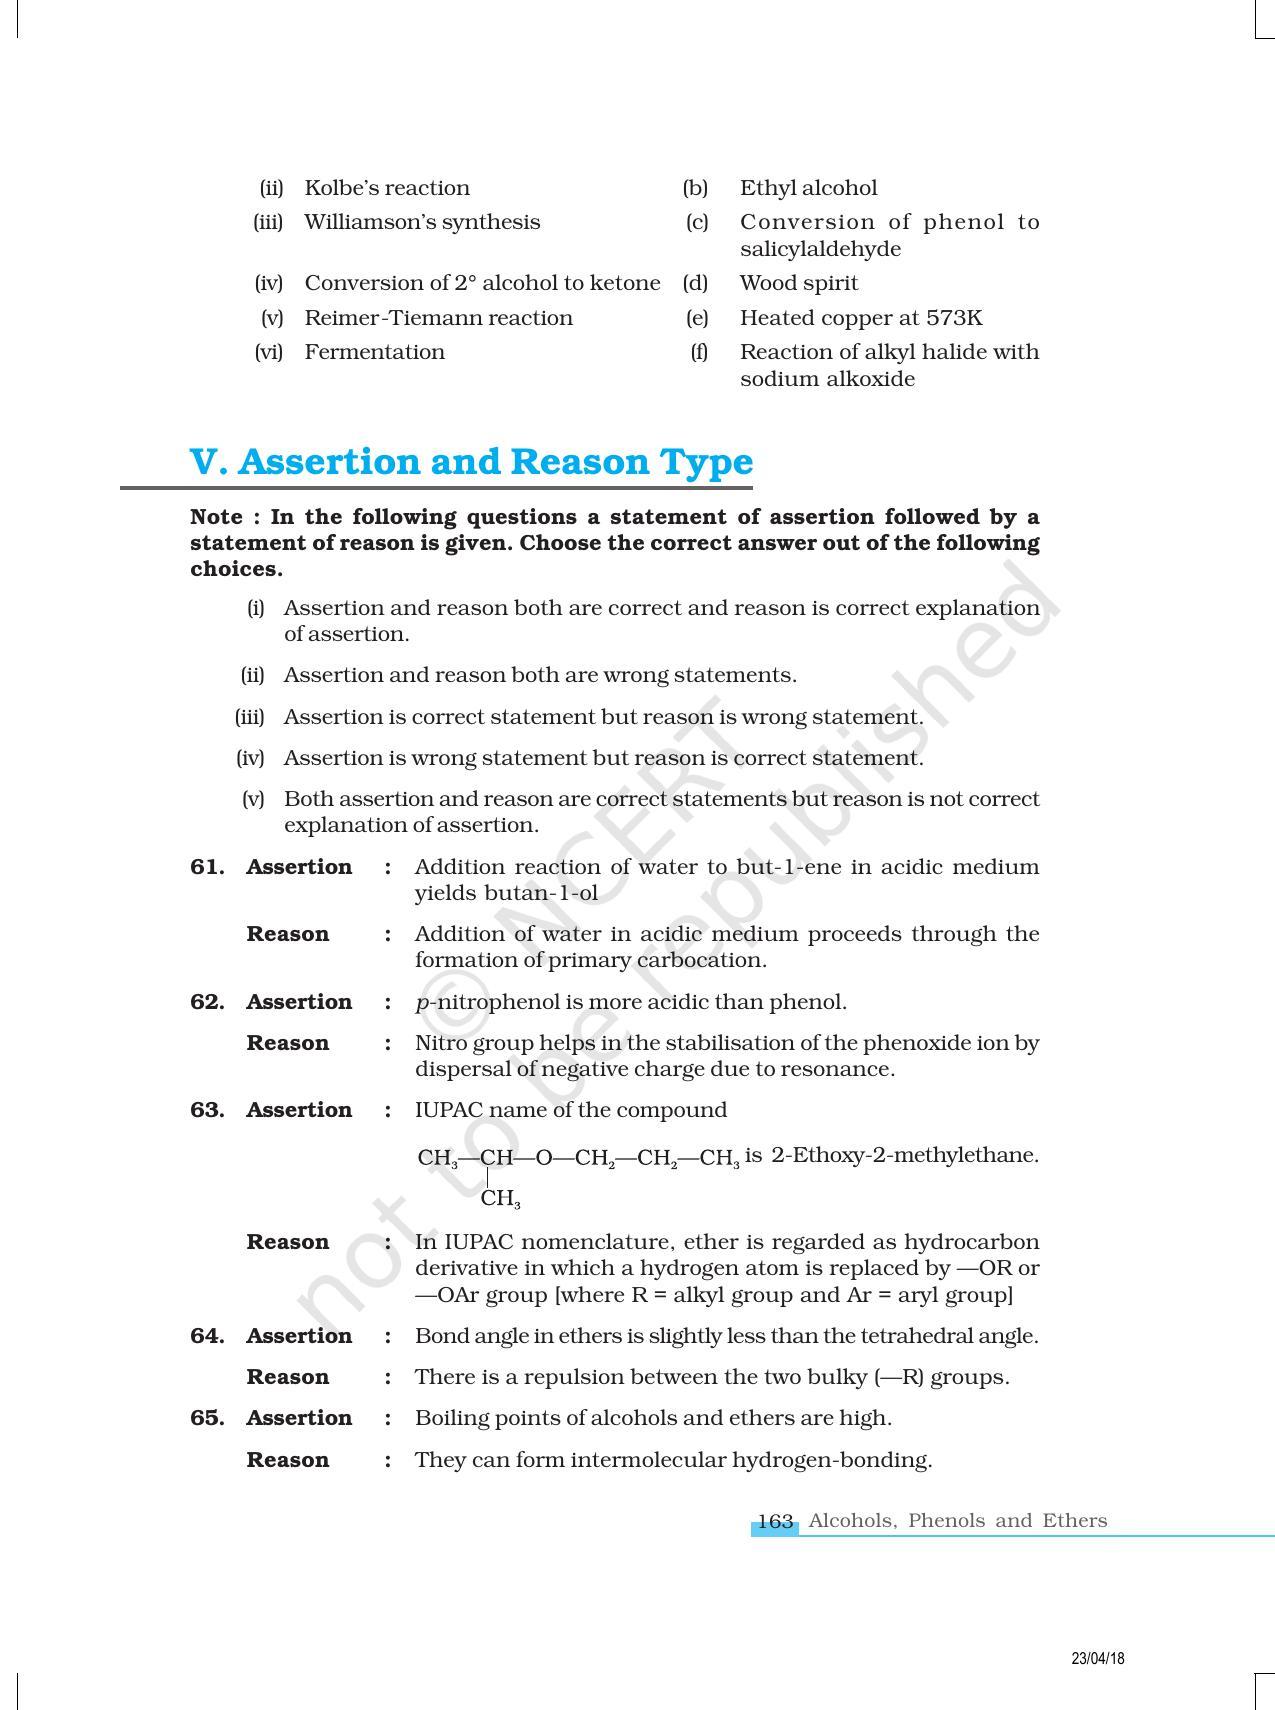 NCERT Exemplar Book for Class 12 Chemistry: Chapter 11 Alcohols, Phenols and Ethers - Page 10